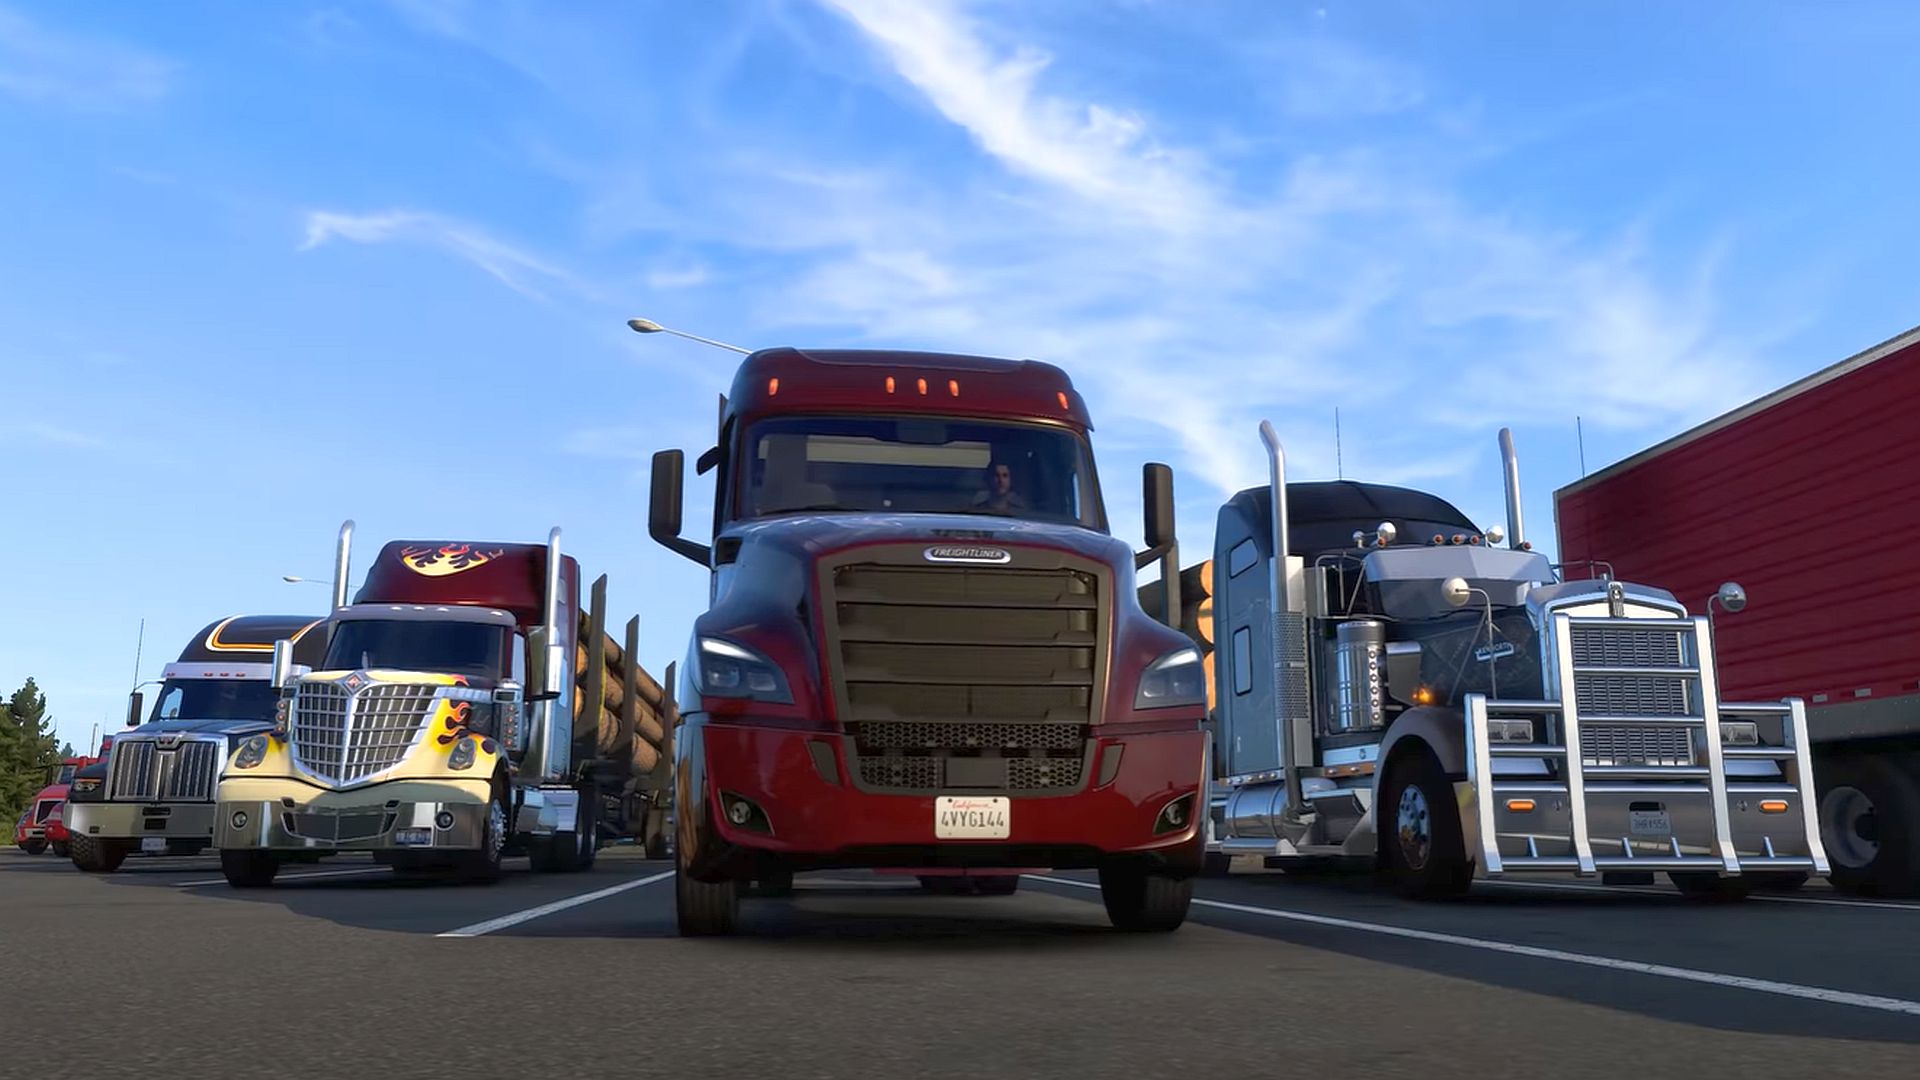 American Truck Simulator multiplayer is coming “hopefully in a matter of days”